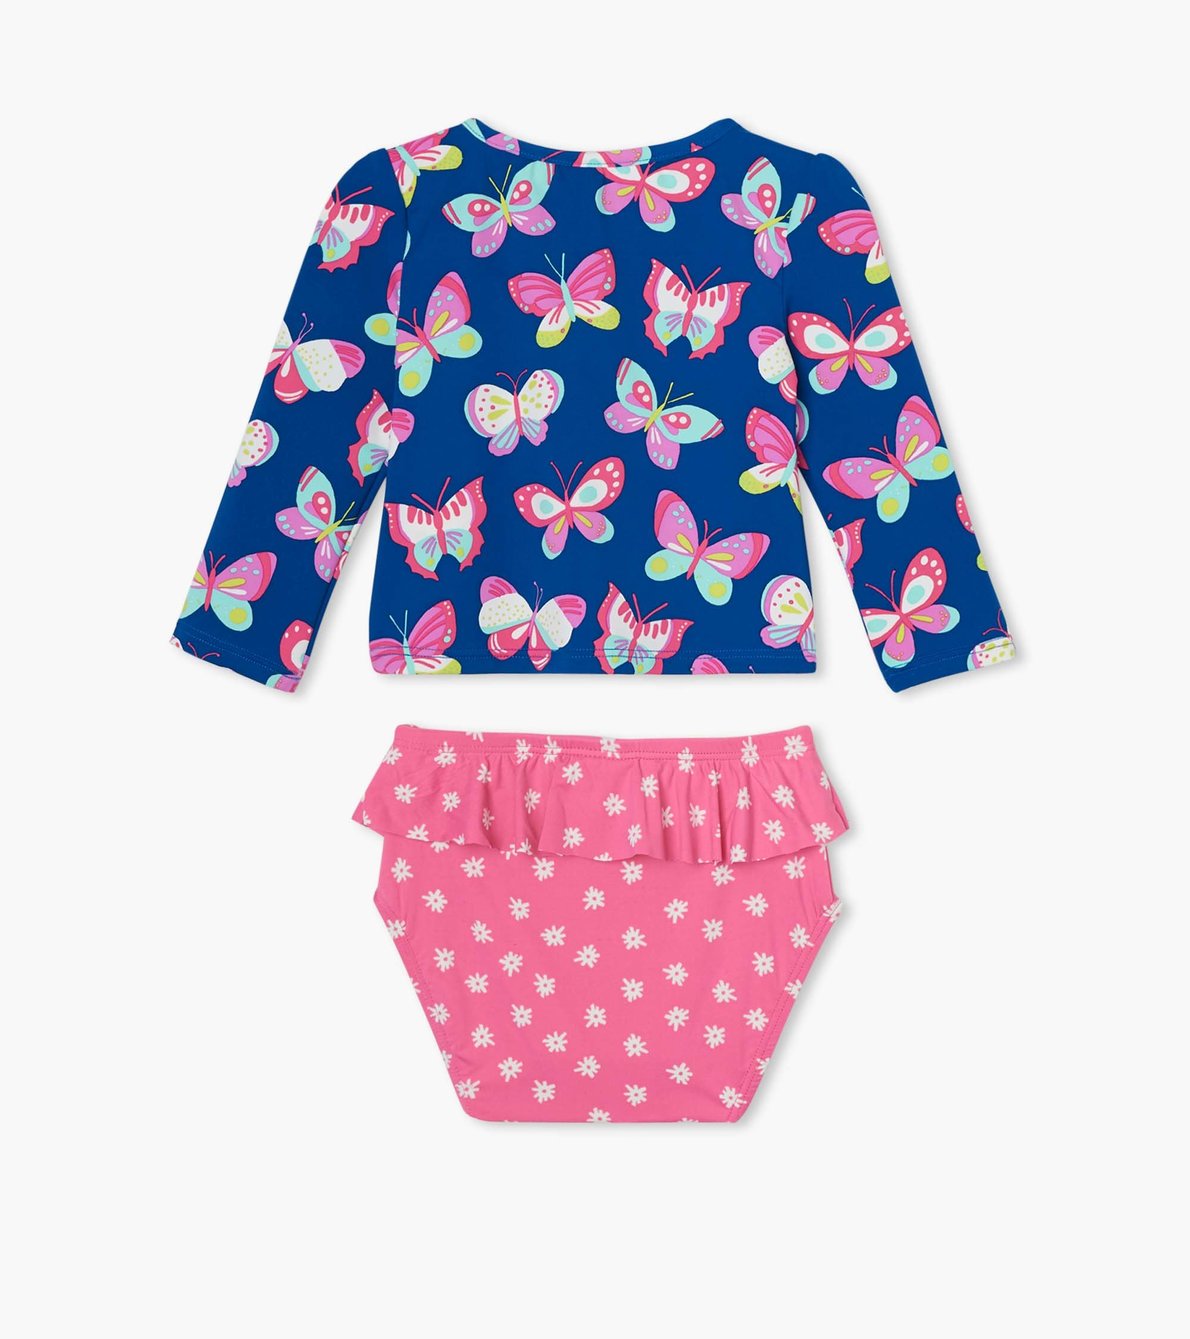 View larger image of Bright Butterflies Baby Rashguard Set